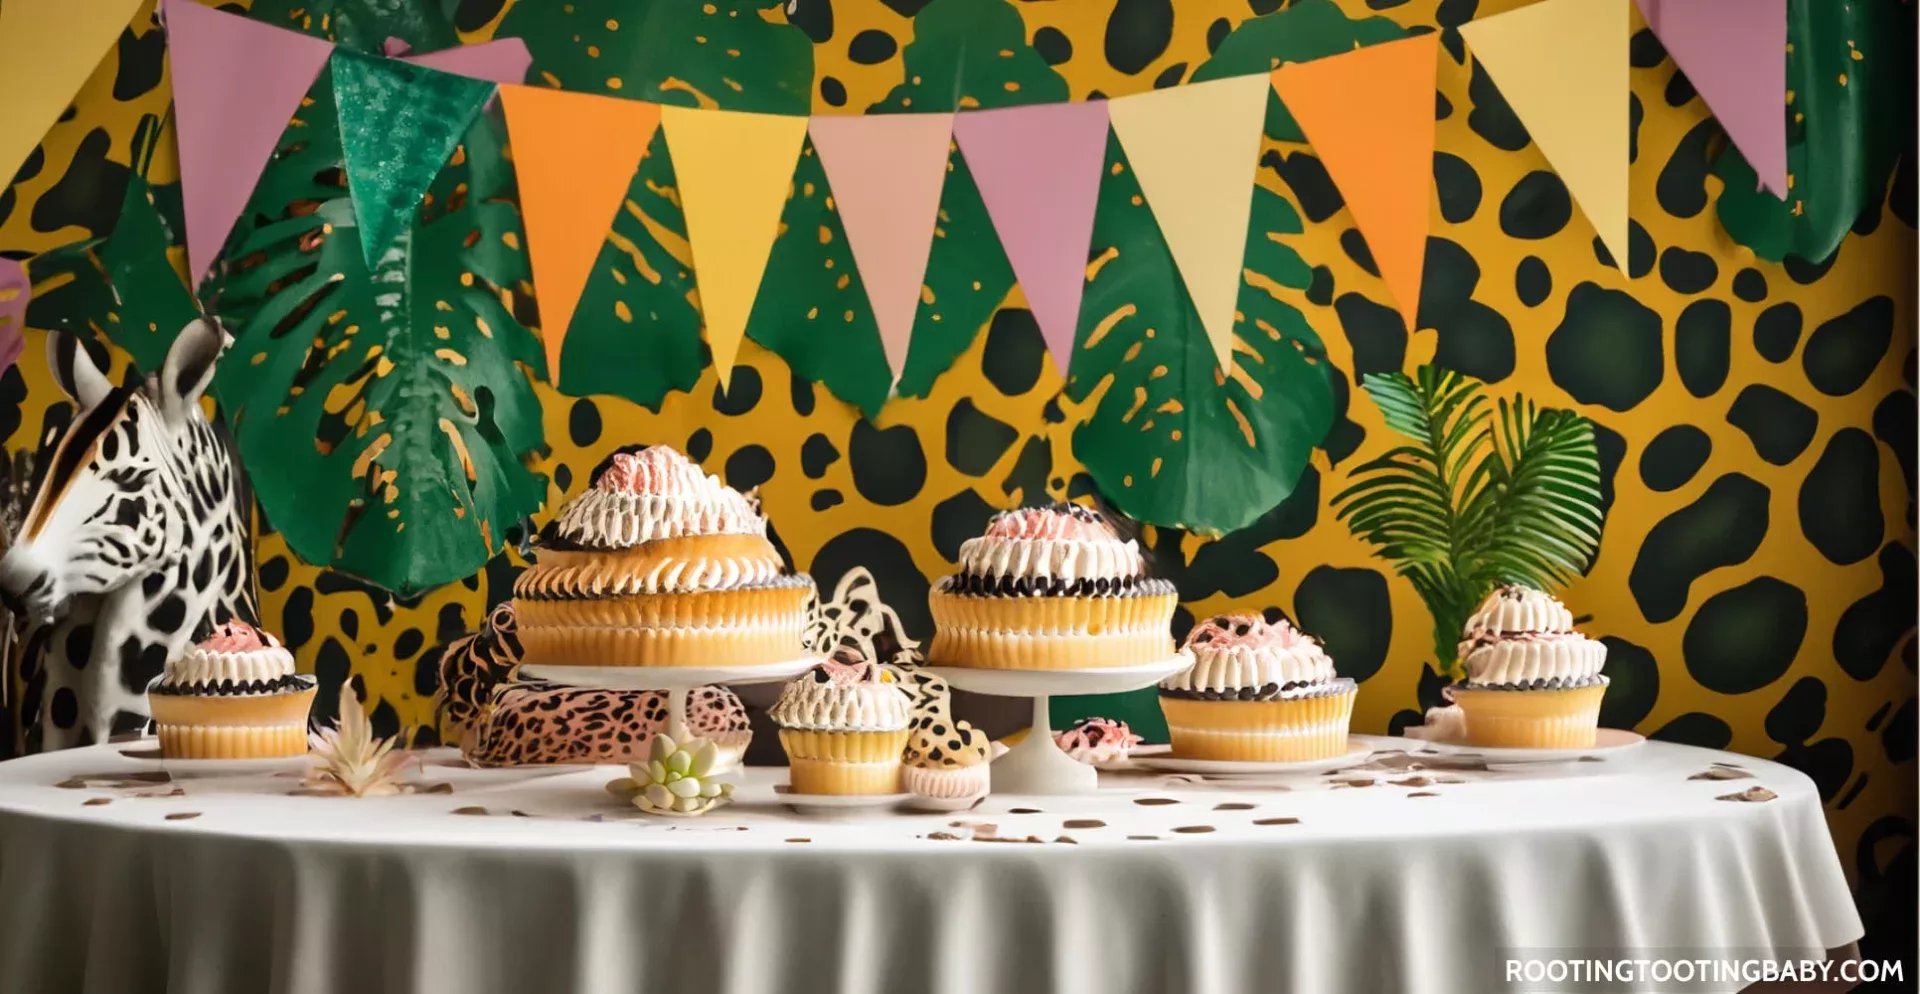 9 Unforgettable Baby Shower Themes That Will Wow Your Guests